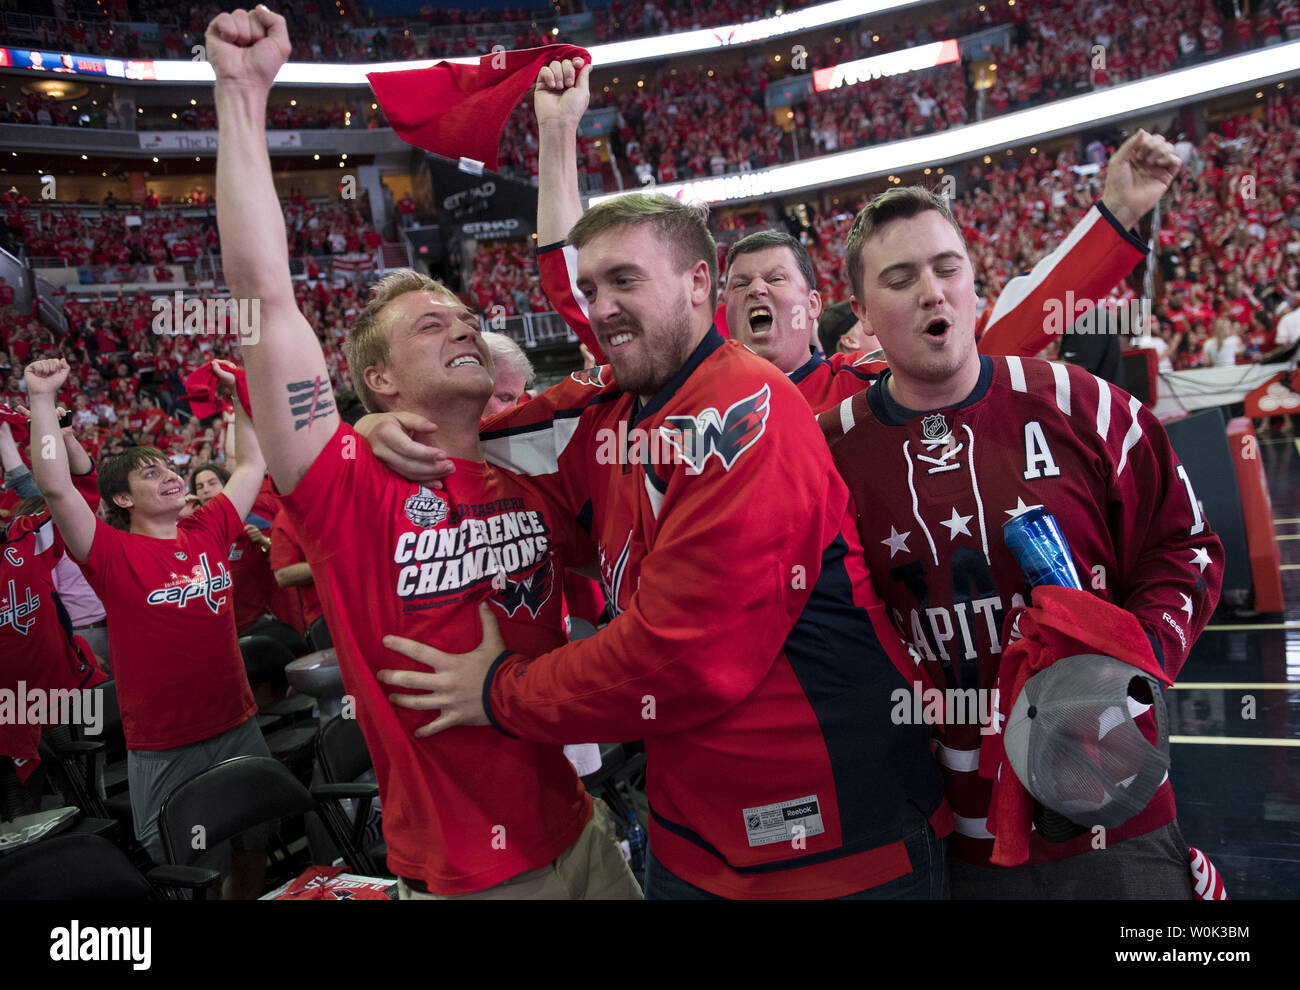 https://c8.alamy.com/comp/W0K3BM/washington-capitals-fans-celebrate-as-the-capitals-win-the-stanley-cup-during-a-watch-party-at-the-capital-one-arena-in-washington-dc-on-june-8-2018-the-capitals-won-the-stanley-cup-defeating-the-vegas-golden-knights-in-game-5-winning-the-series-4-games-to-1-thousands-of-fans-gathered-inside-and-outside-the-area-to-watch-the-game-that-was-played-in-las-vegas-photo-by-kevin-dietschupi-W0K3BM.jpg